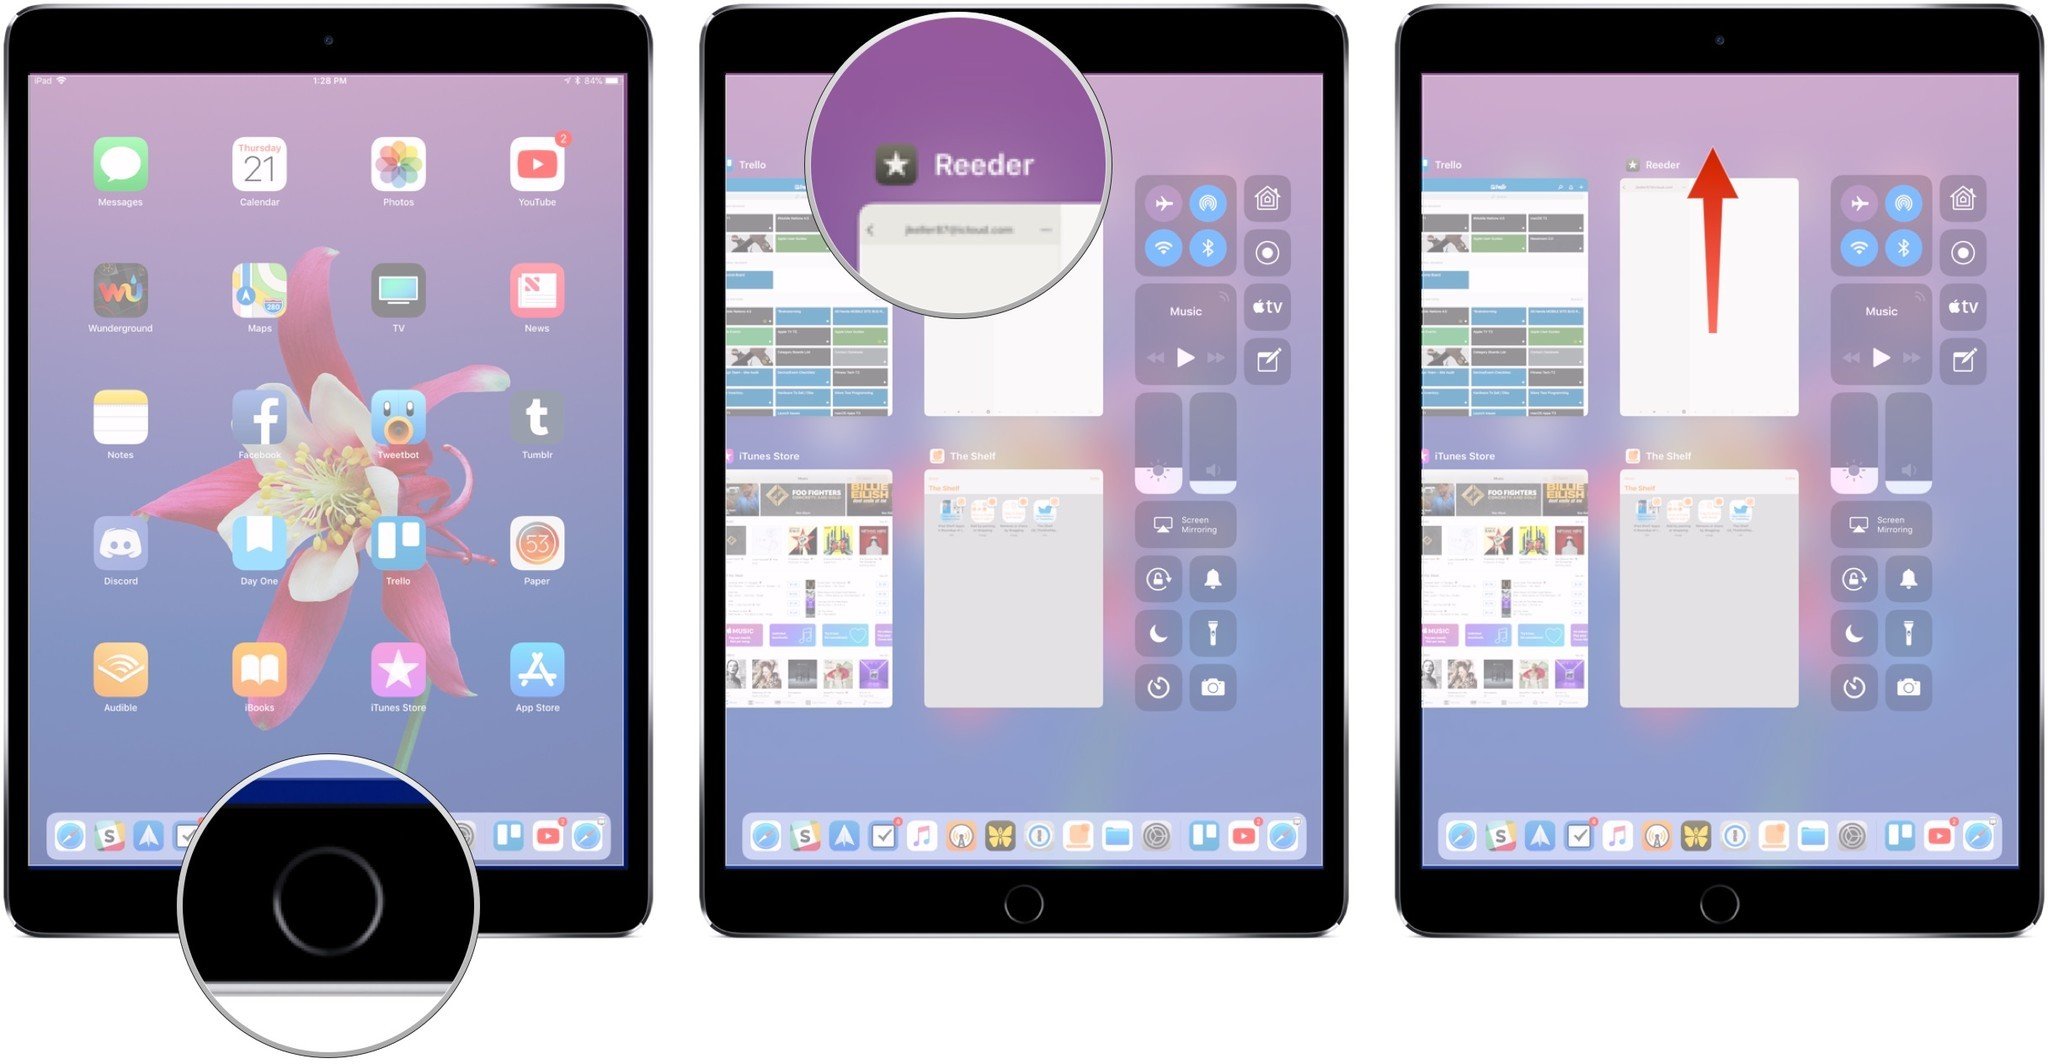 Double-click Home button, find the app, swipe up on it